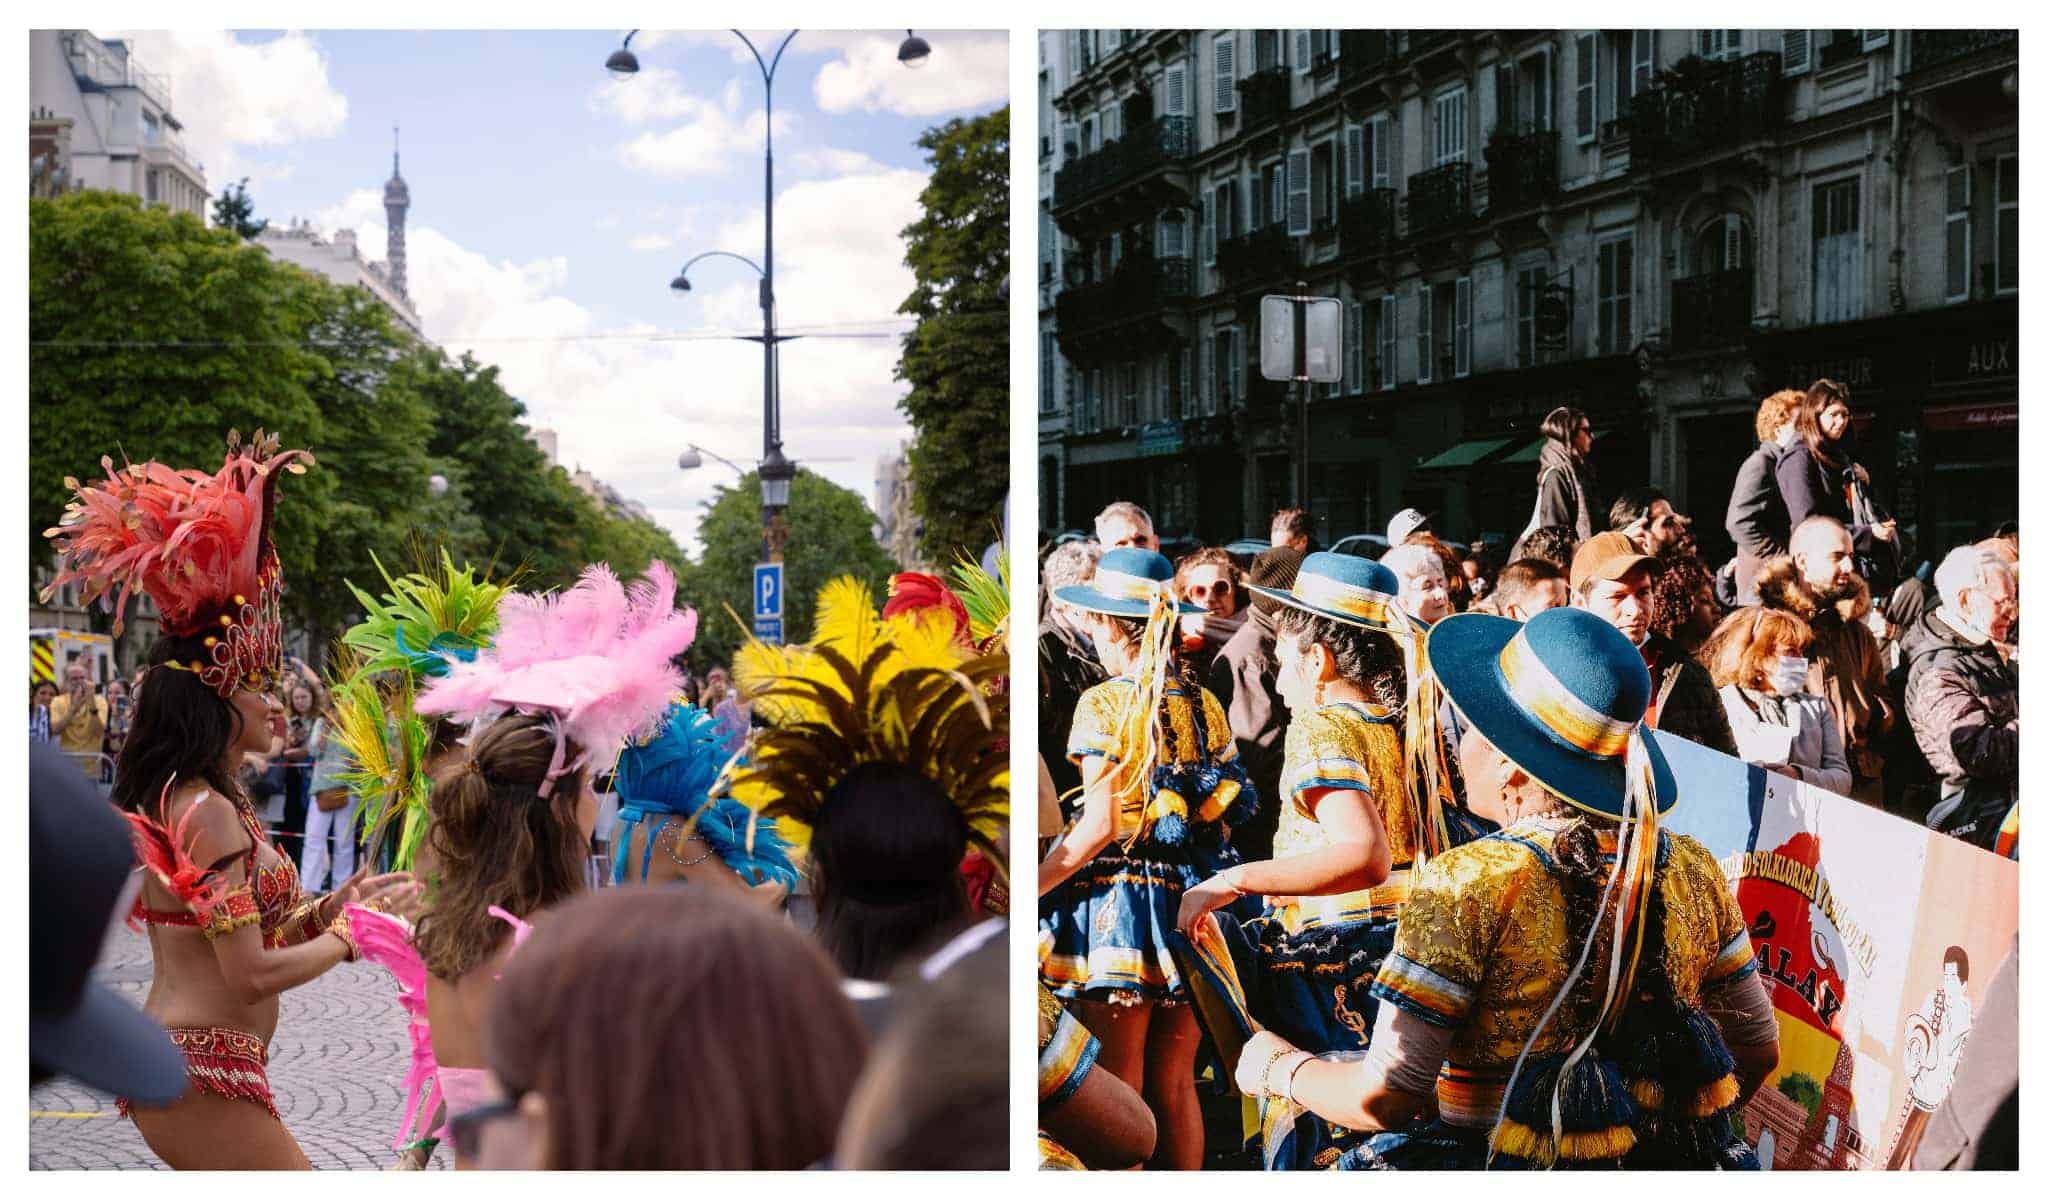 Left and Right: Paris city Carnival with people dressed up in colourful attire and enjoying themselves on the streets of Paris